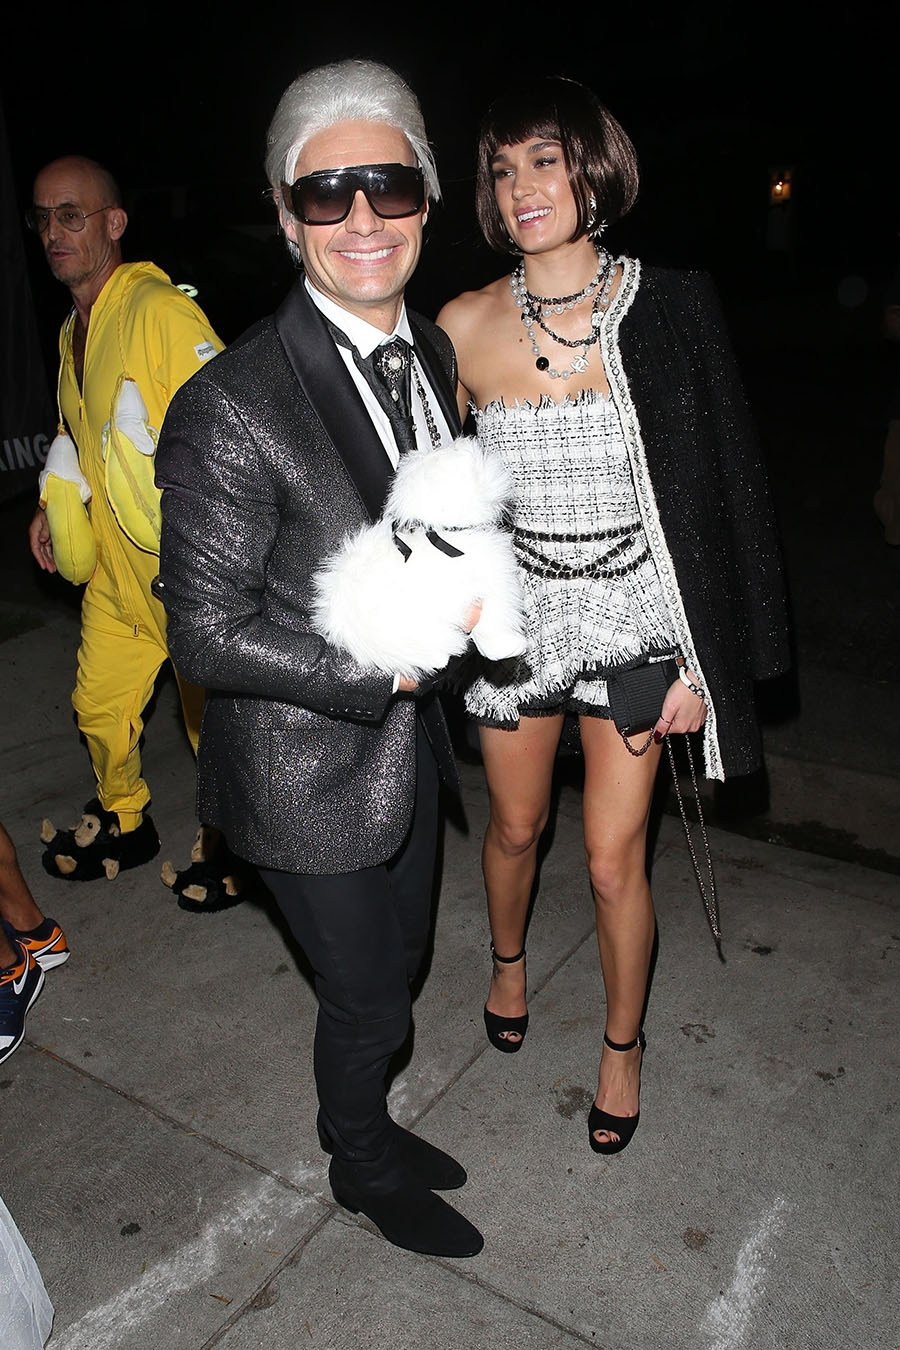 Ryan Seacrest, who is dressed up as Karl Lagerfeld, is seen leaving the ...